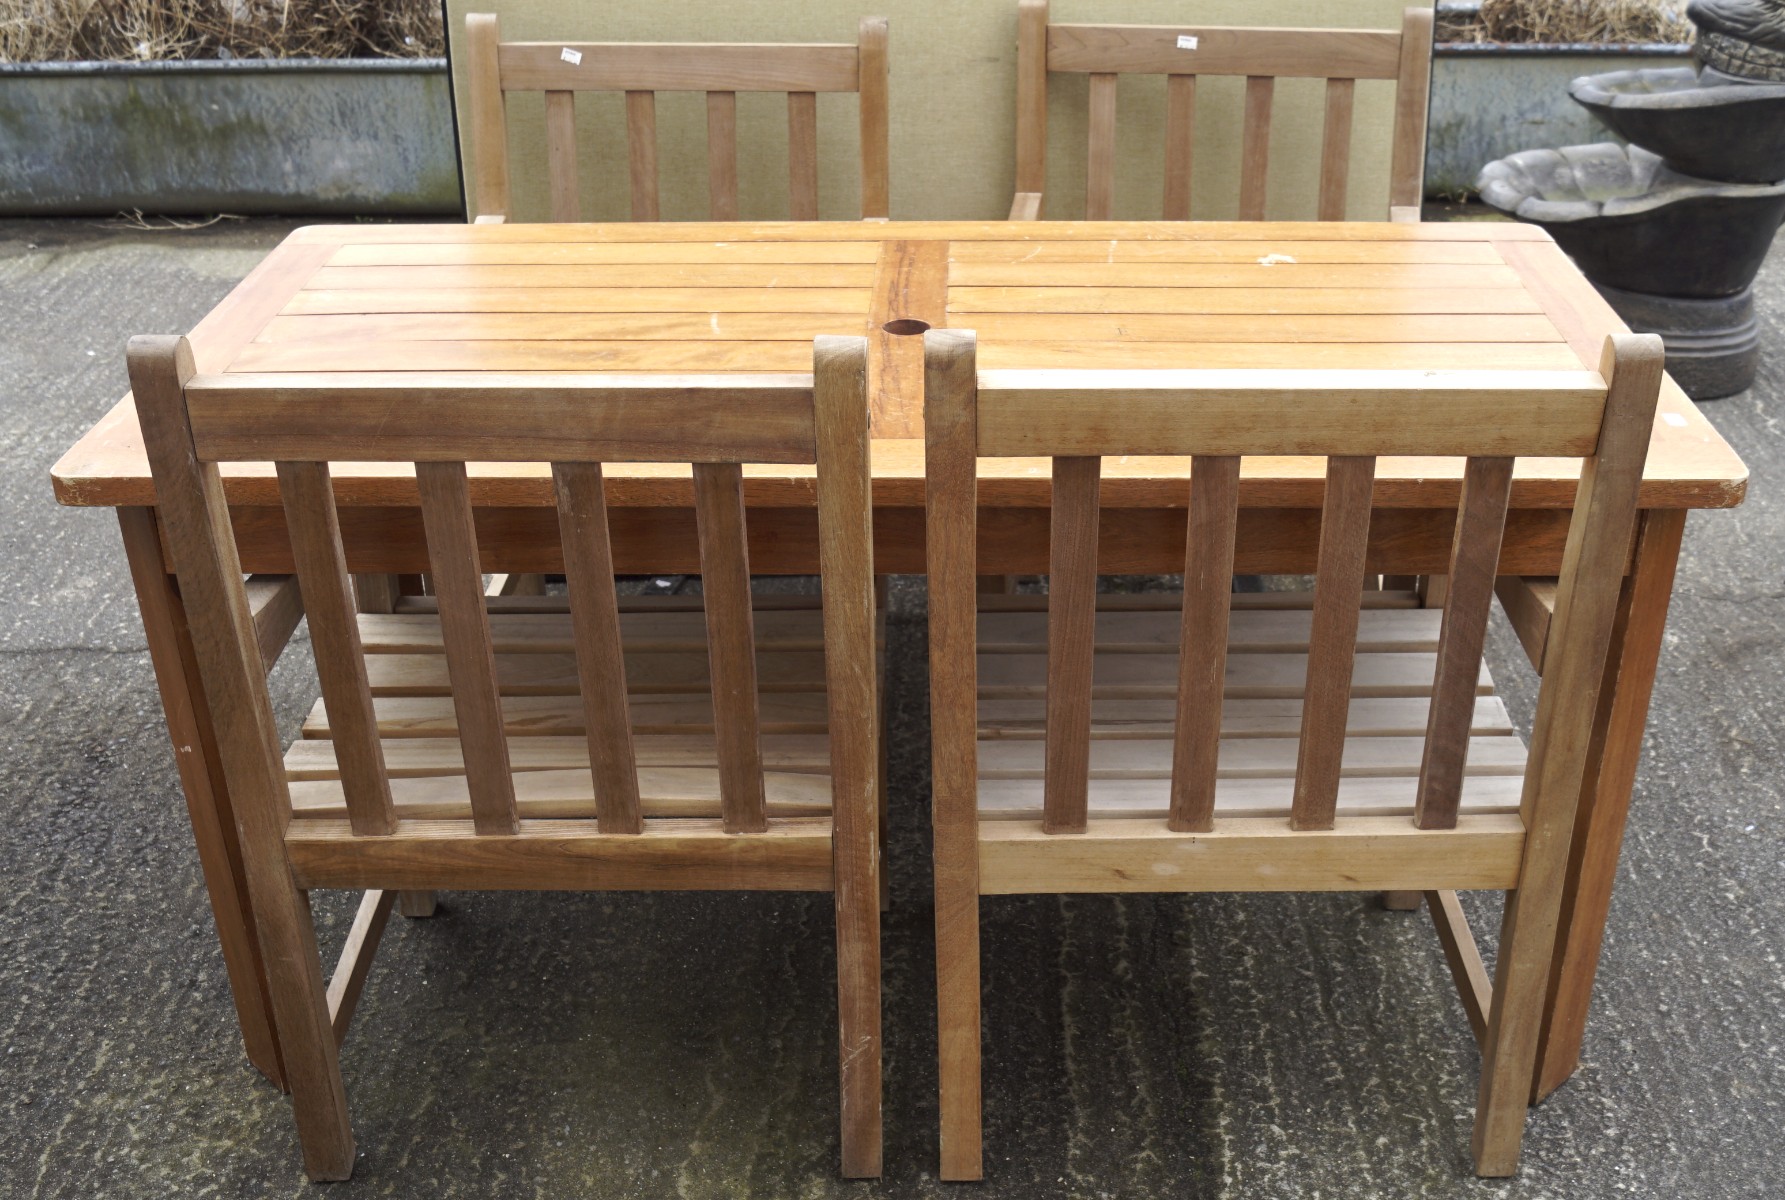 A modern garden table and four matching chairs,